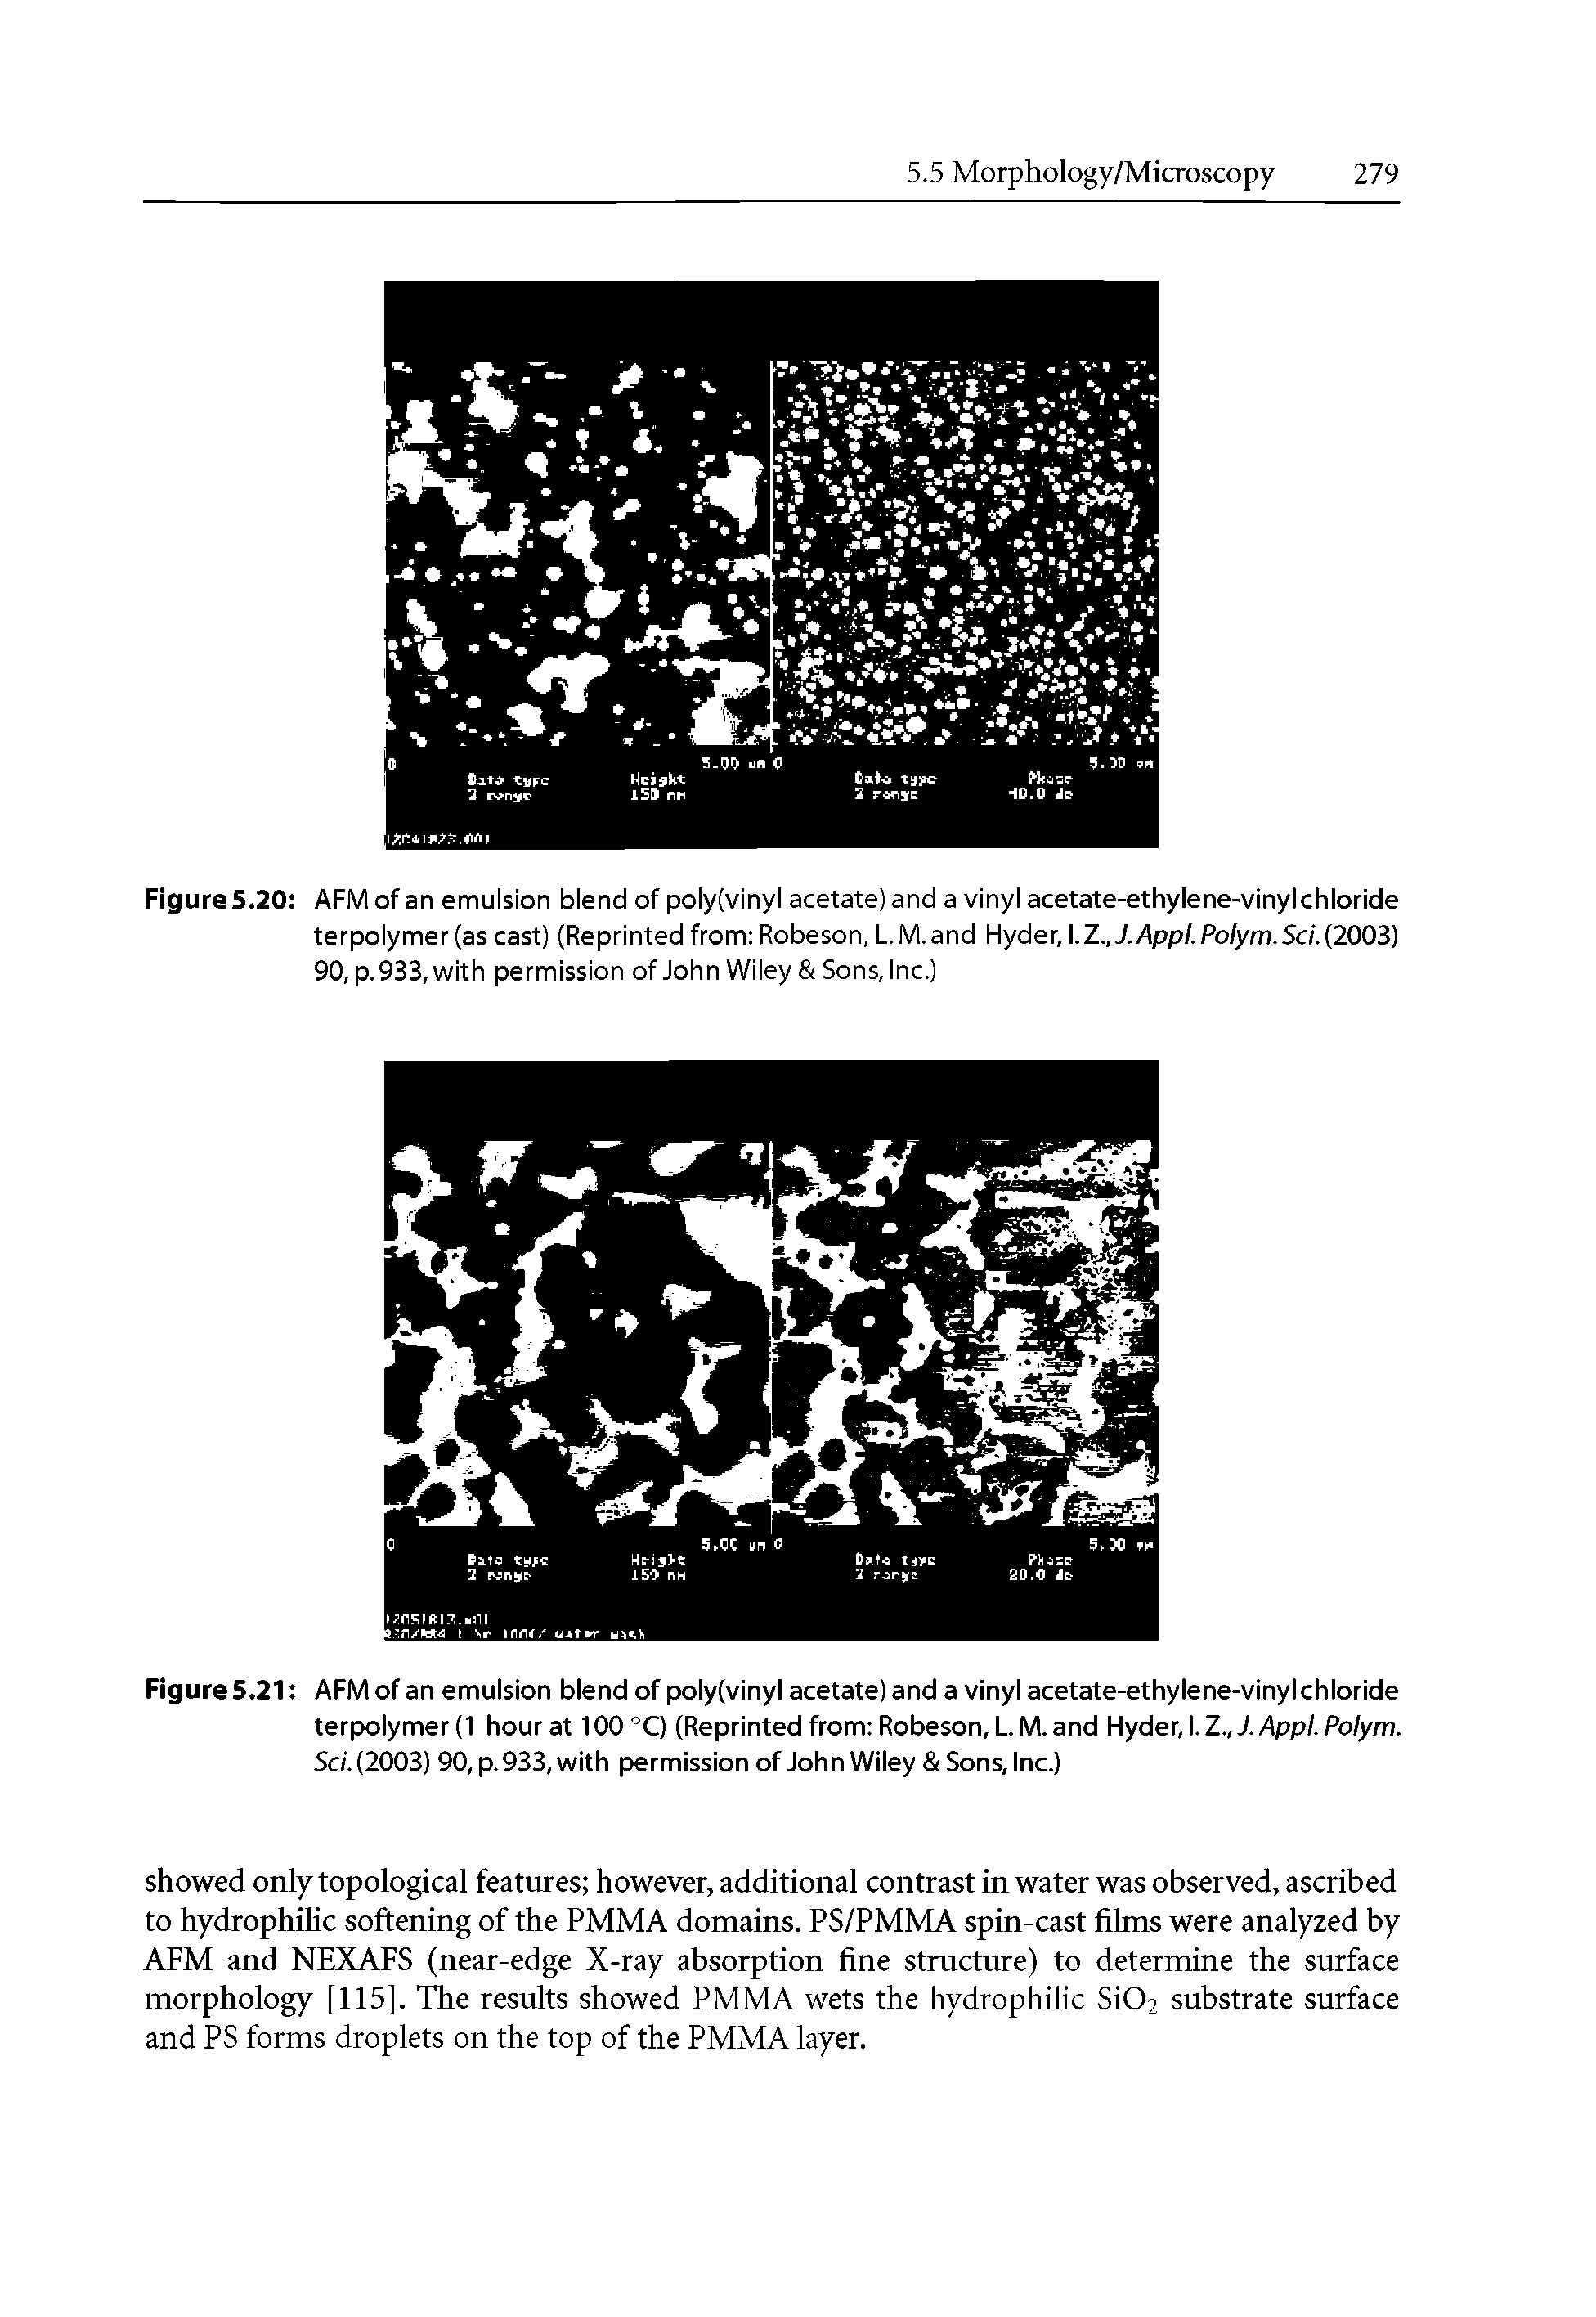 Figure5.20 AFM of an emulsion blend of poly(vinyl acetate) and a vinyl acetate-ethylene-vinylchloride terpolymer (as cast) (Reprinted from Robeson, L.M.and Hyder,. Z.,J.Appl.Polym.Sci.(2003) 90, p. 933, with permission of John Wiley Sons, Inc.)...